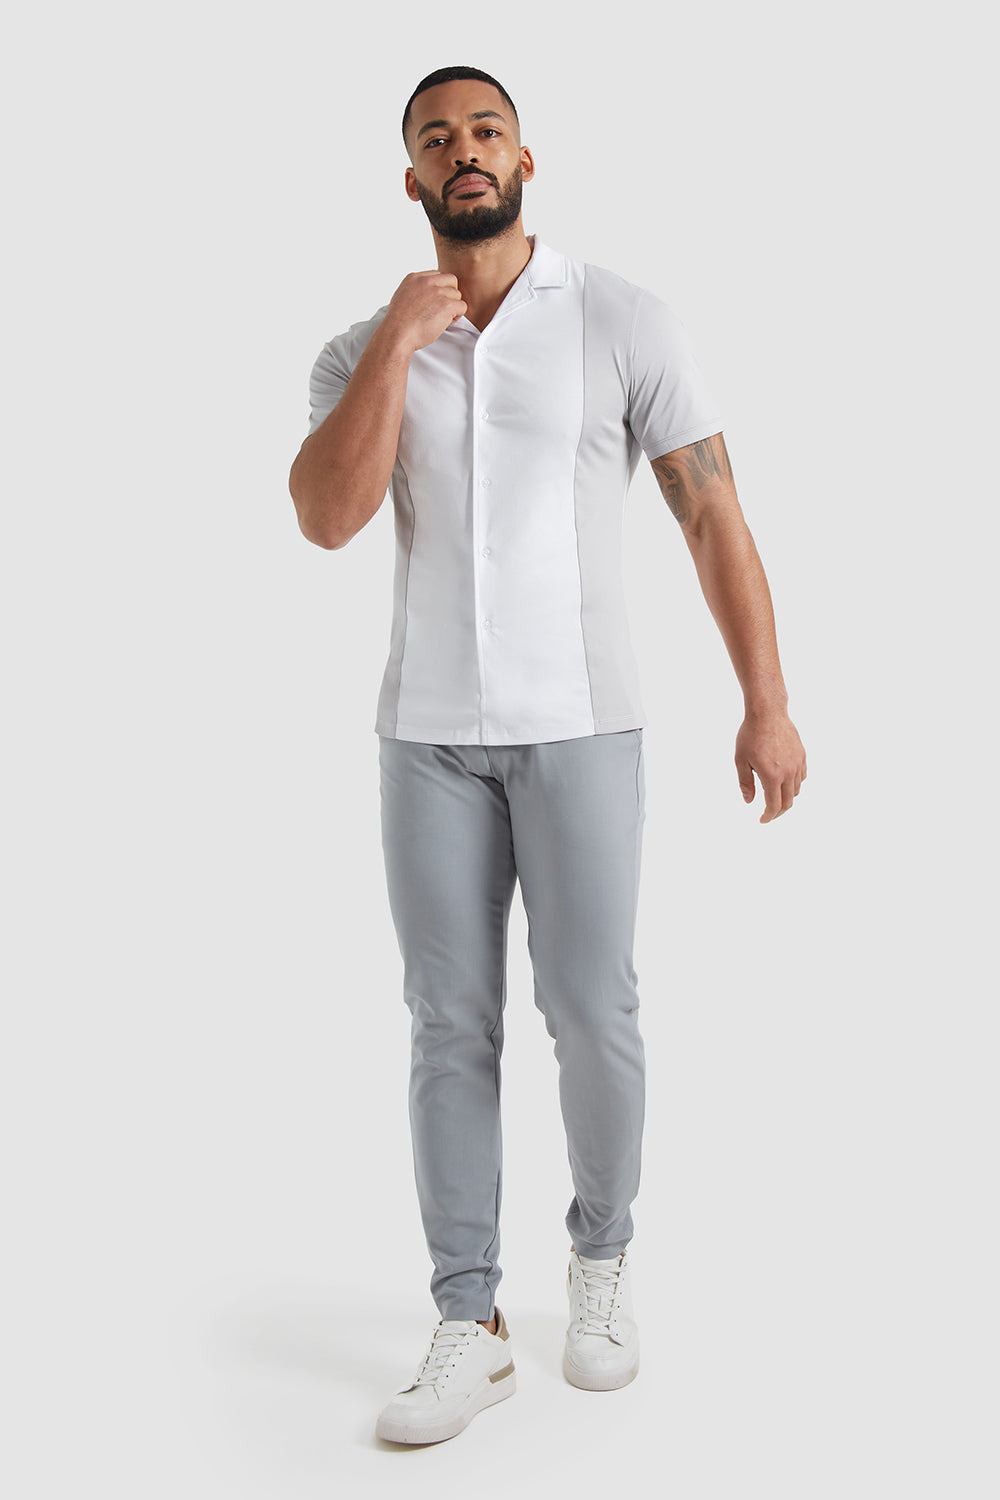 Colour Block Jersey Shirt in White/Grey - TAILORED ATHLETE - ROW